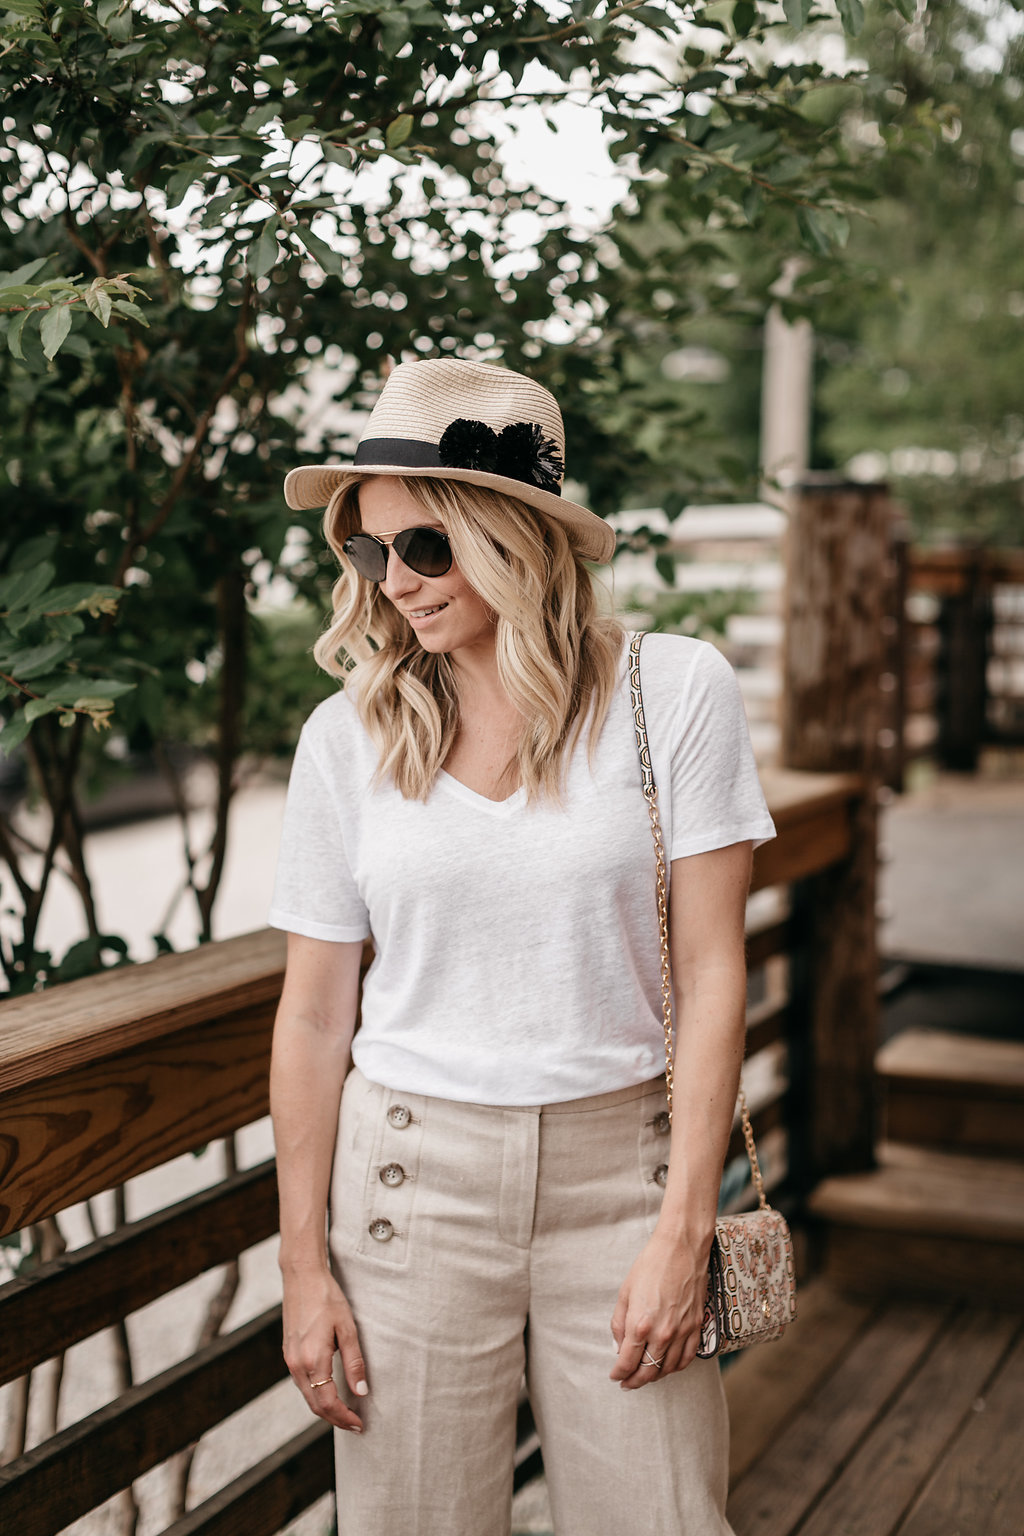 One Small Blonde | Brooke Burnett is wearing a basic white t-shirt and a wide leg sailor pants